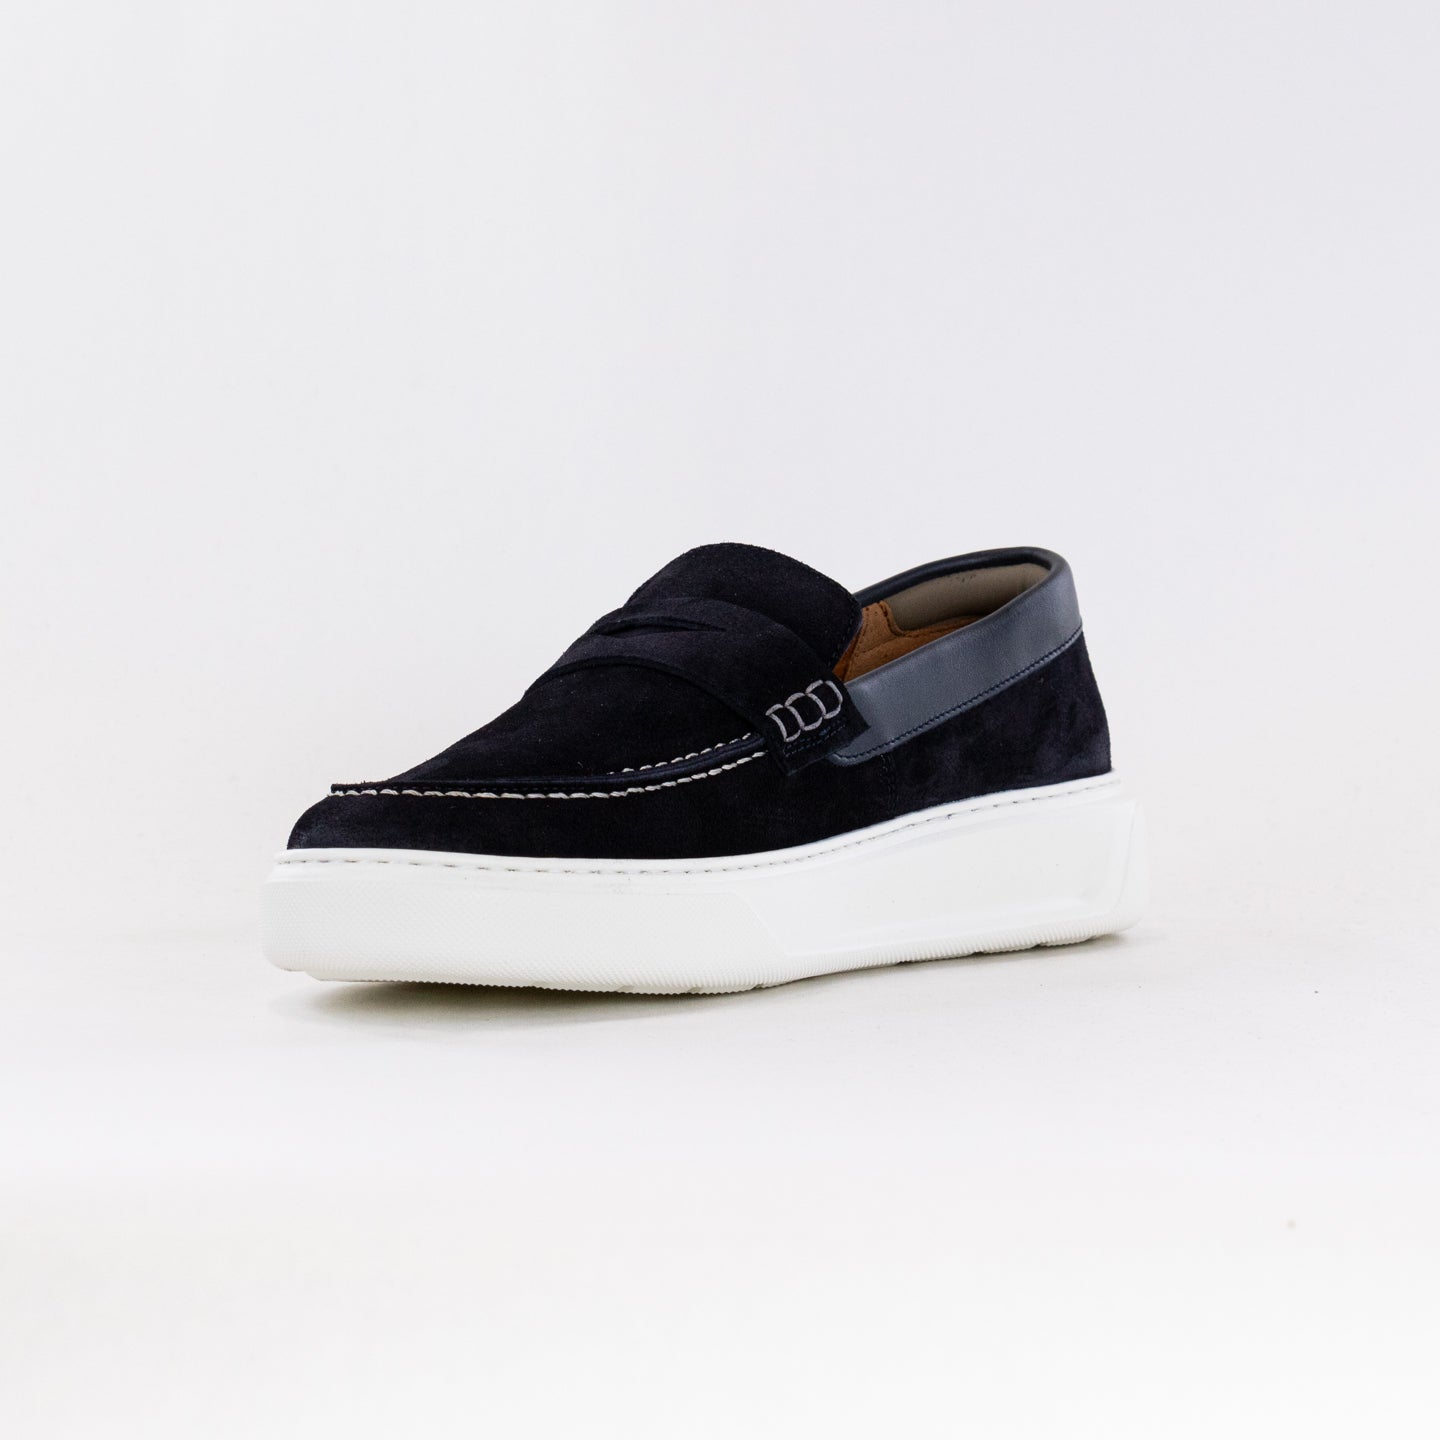 Ambitious KIT Loafer (Men's) - Navy Suede